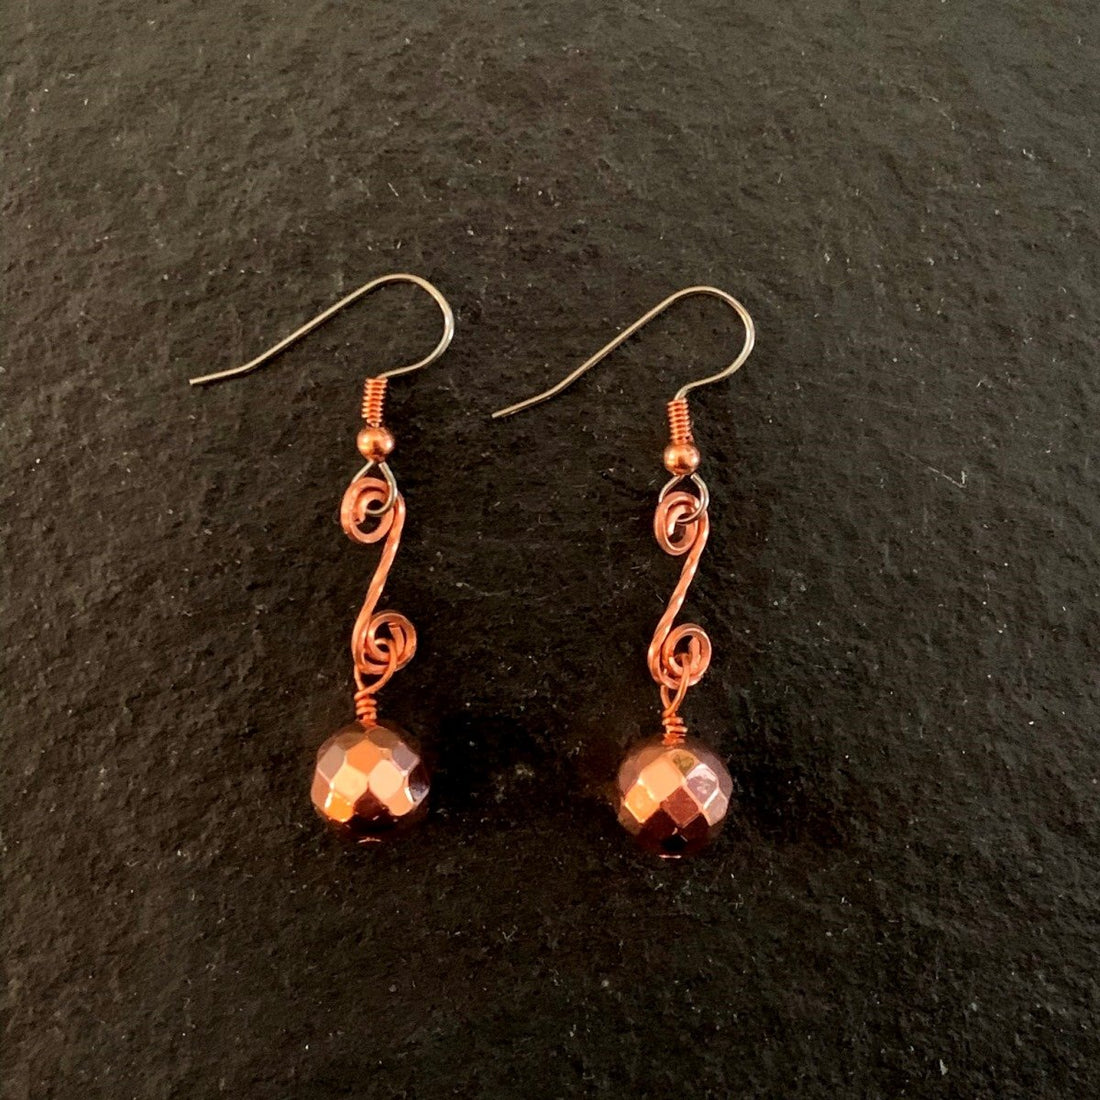 Earrings made of Copper Disco beads on scrolled copper wire